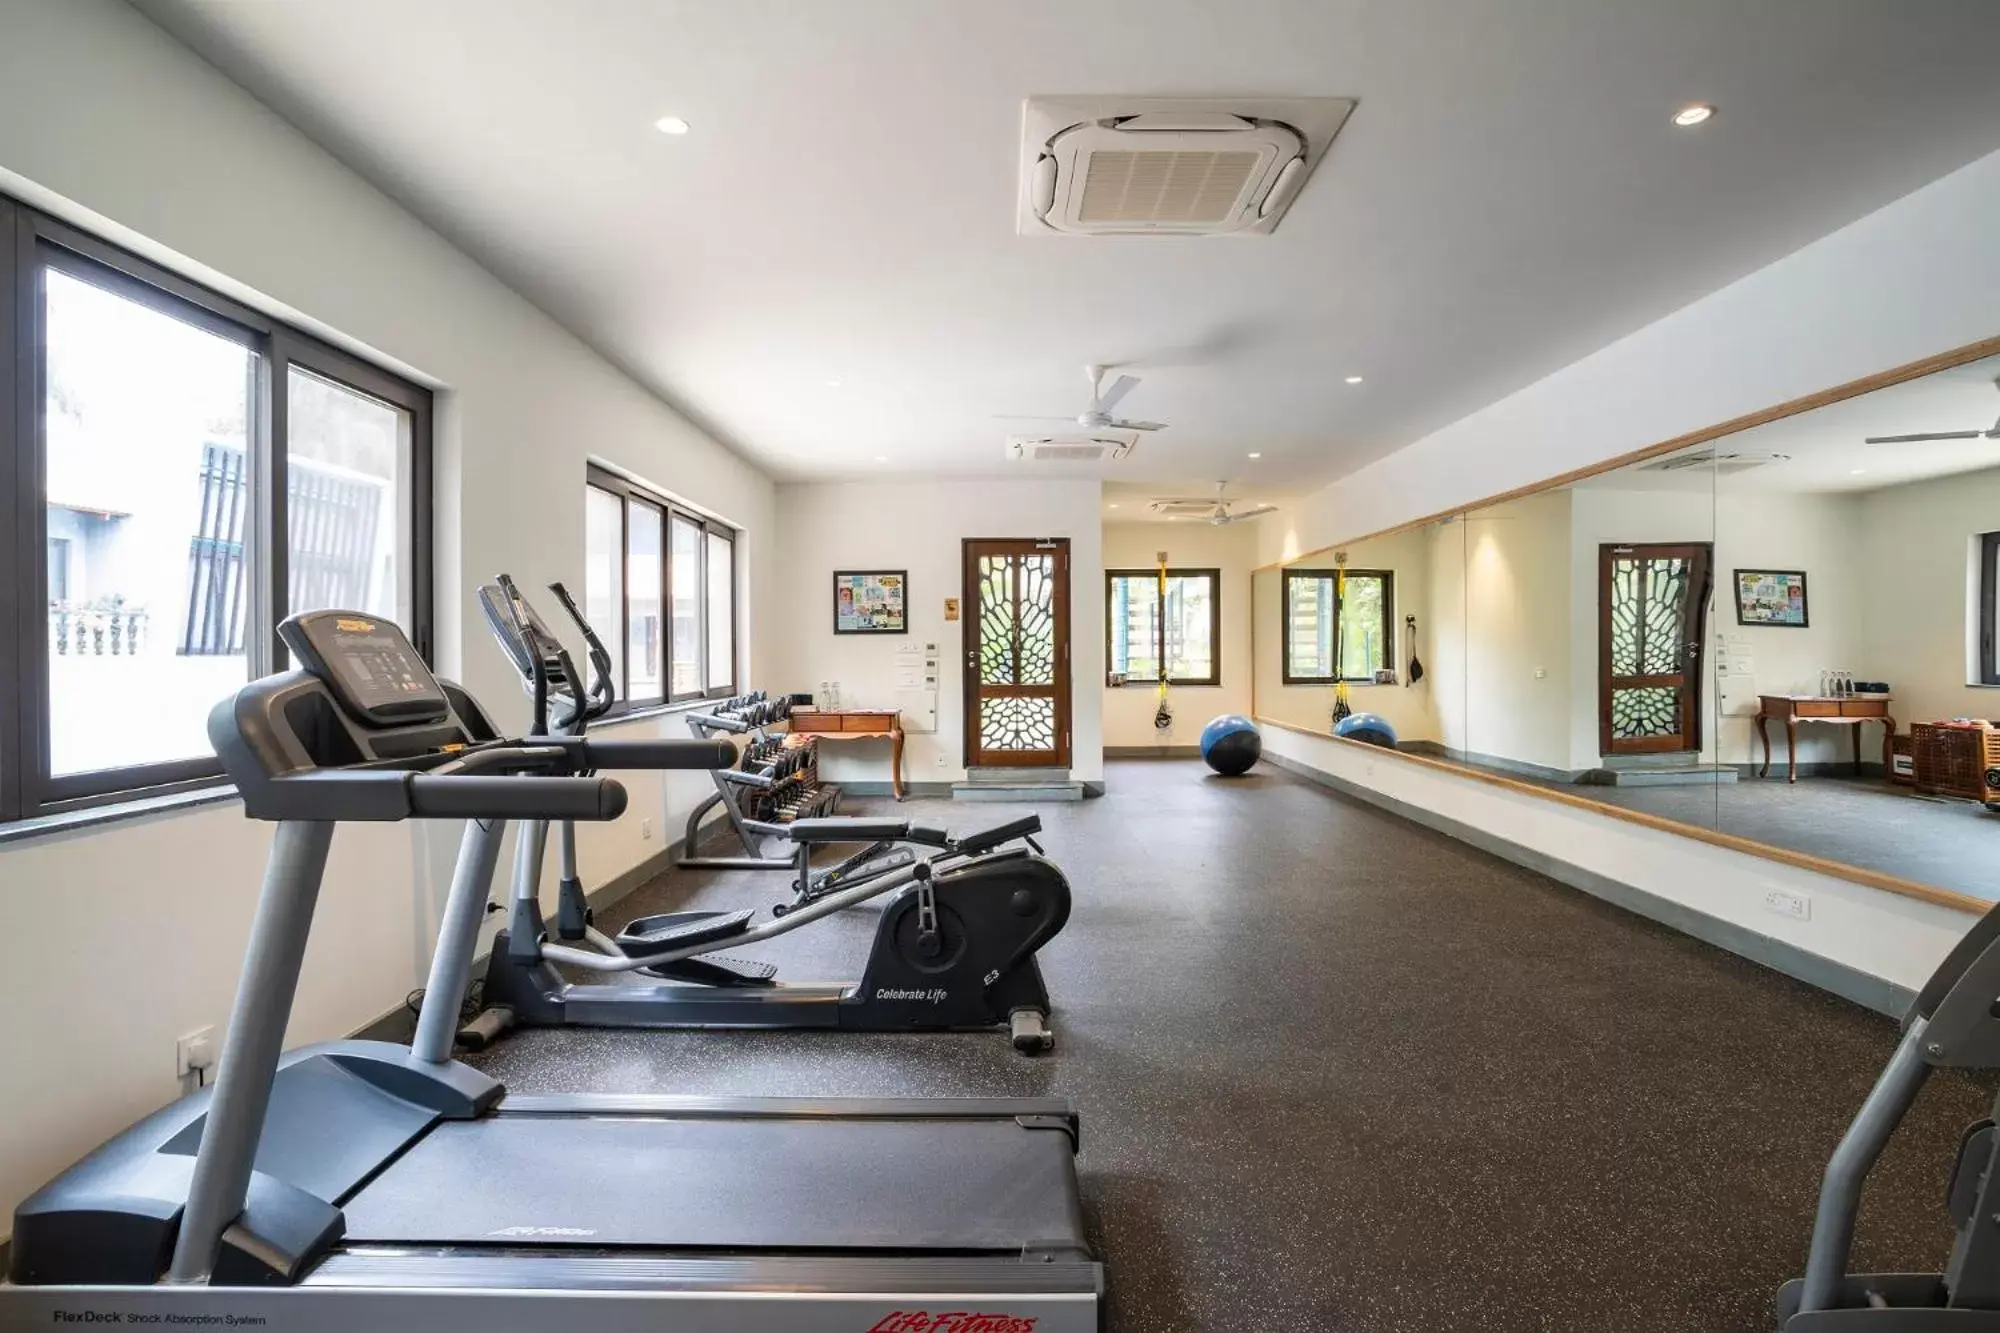 Fitness centre/facilities, Fitness Center/Facilities in Beleza By The Beach